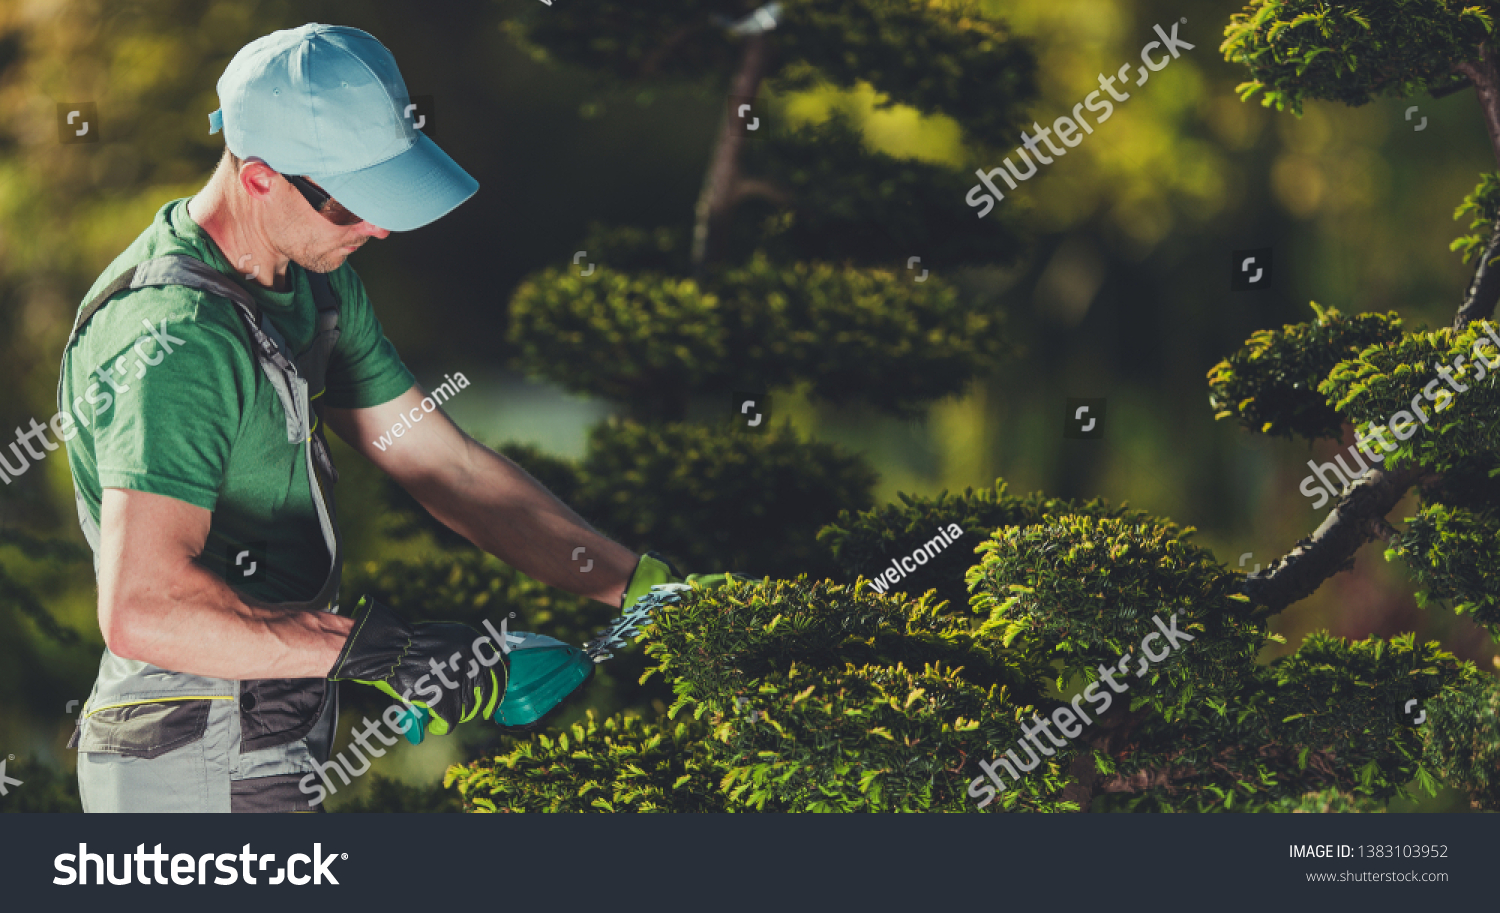 electric topiary trimmer